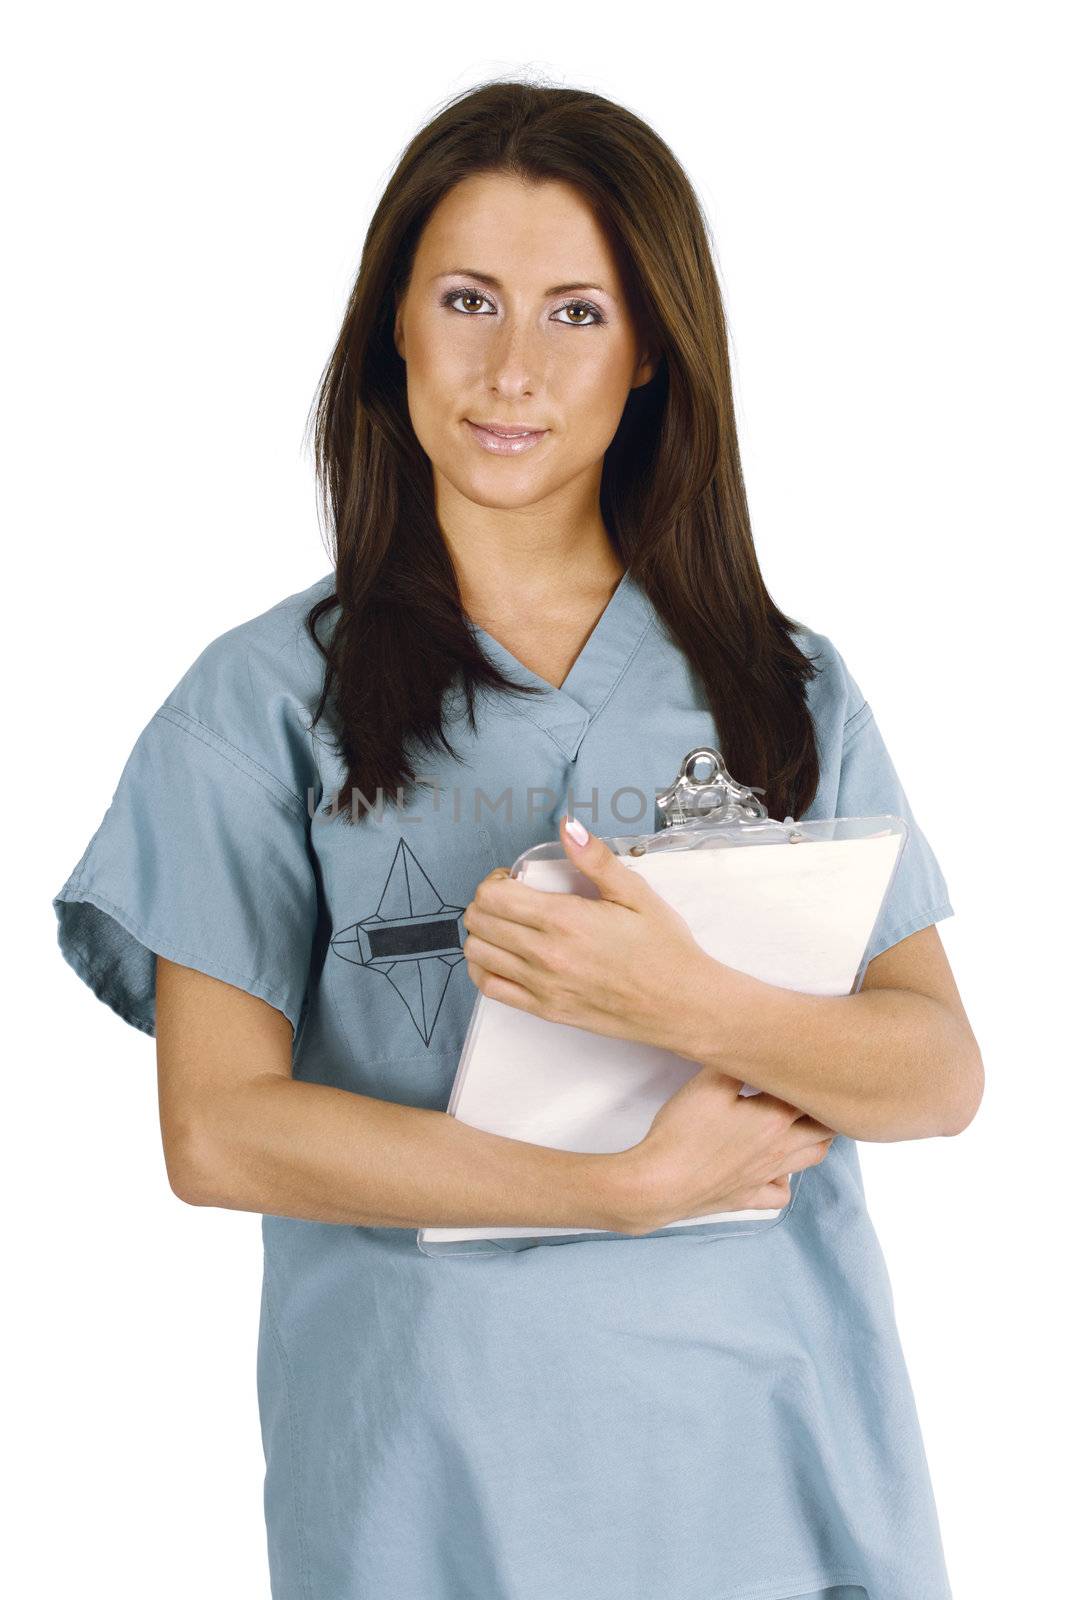 A beautiful young female nurse or dental hygienist carrying medical files.
